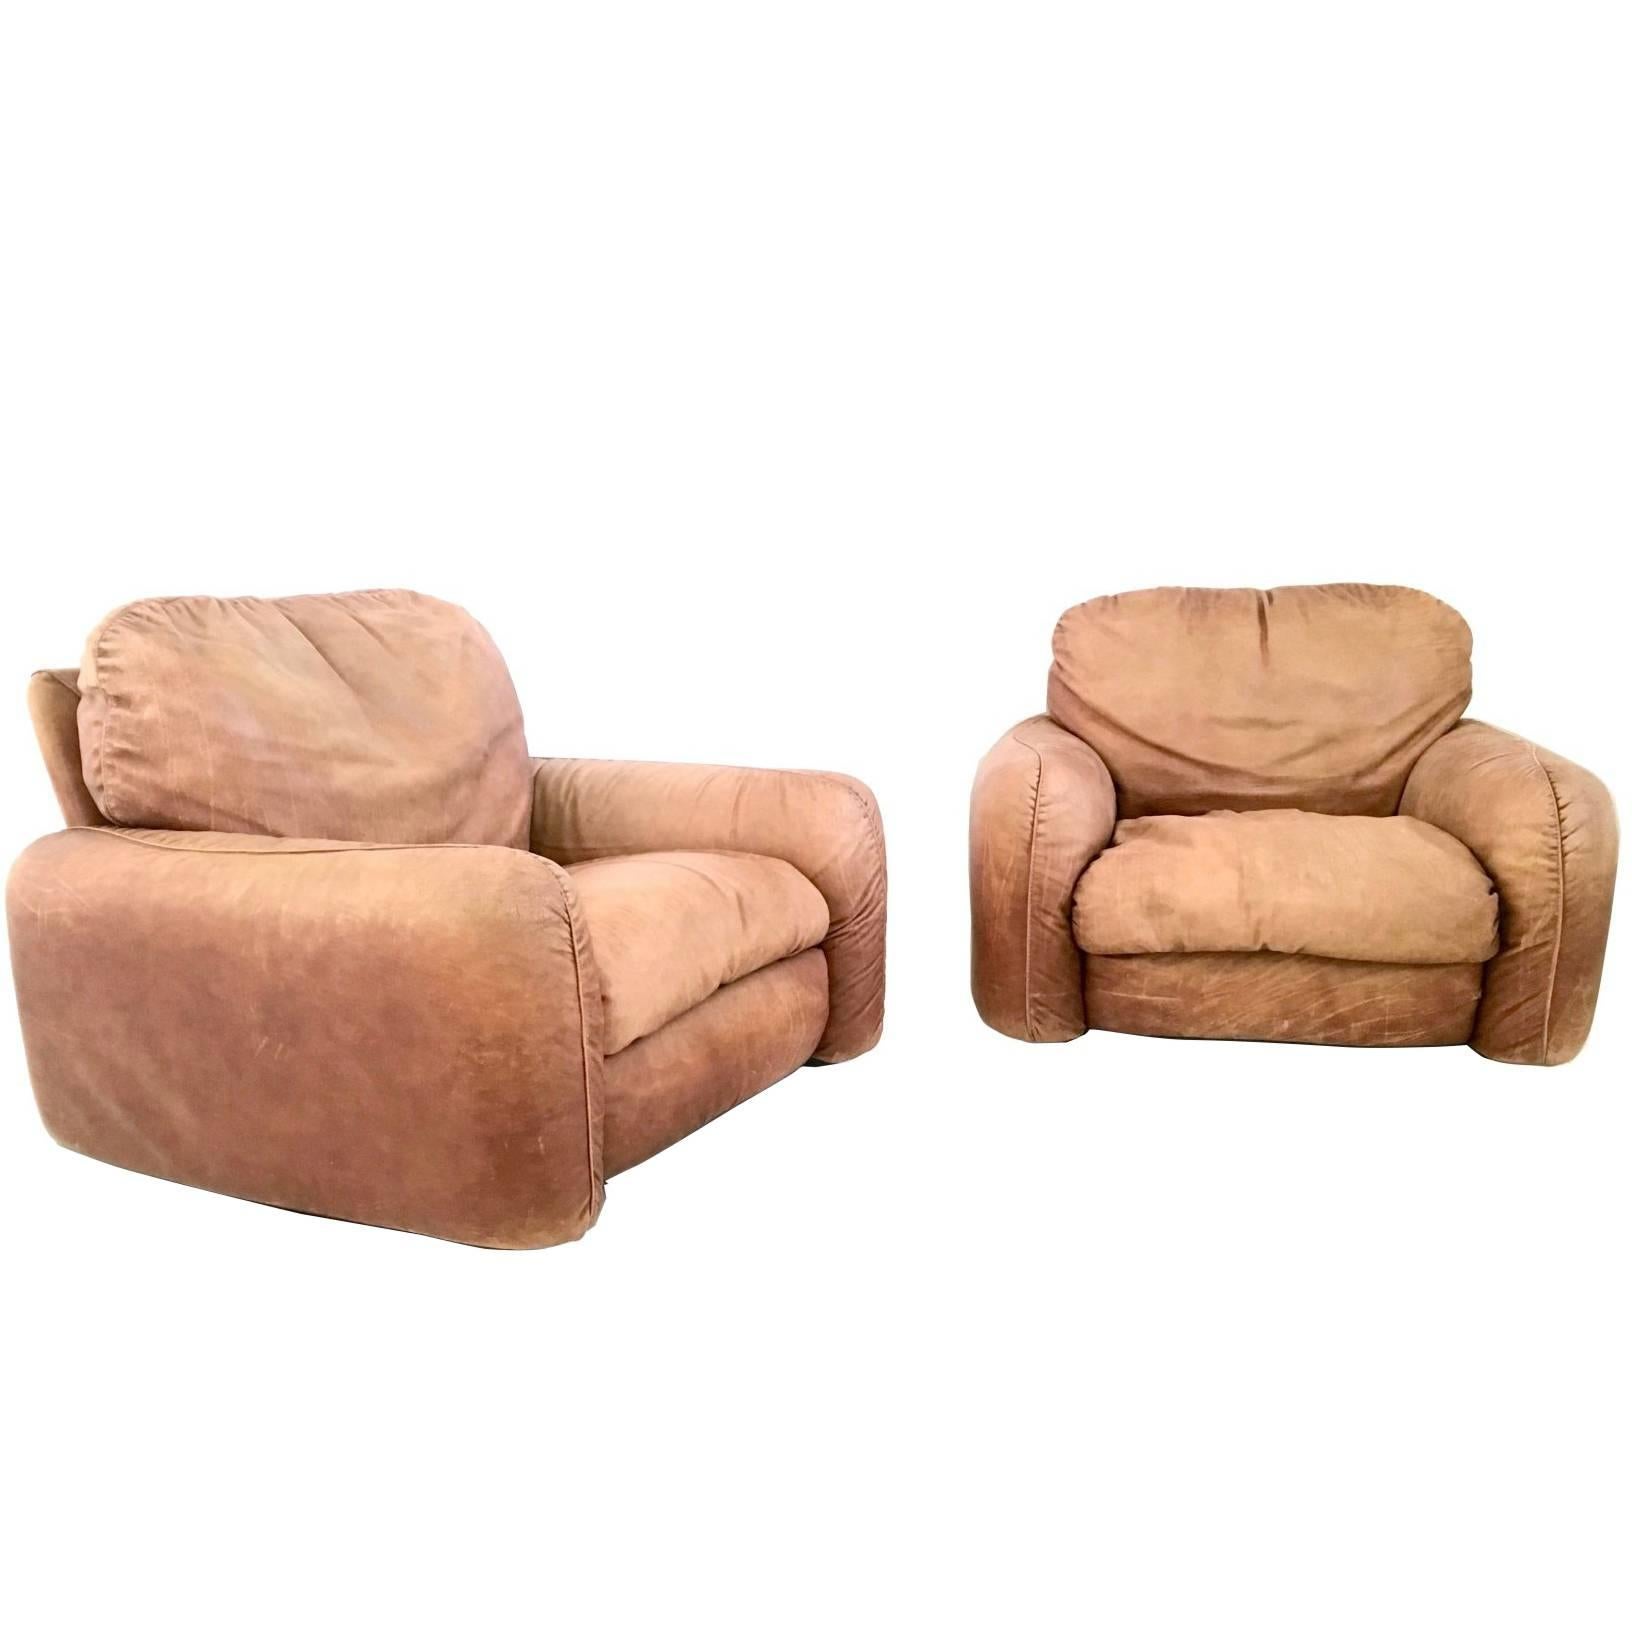 Pair of Leather Armchairs Model "Piumotto" Produced by Busnelli, Italy, 1970s